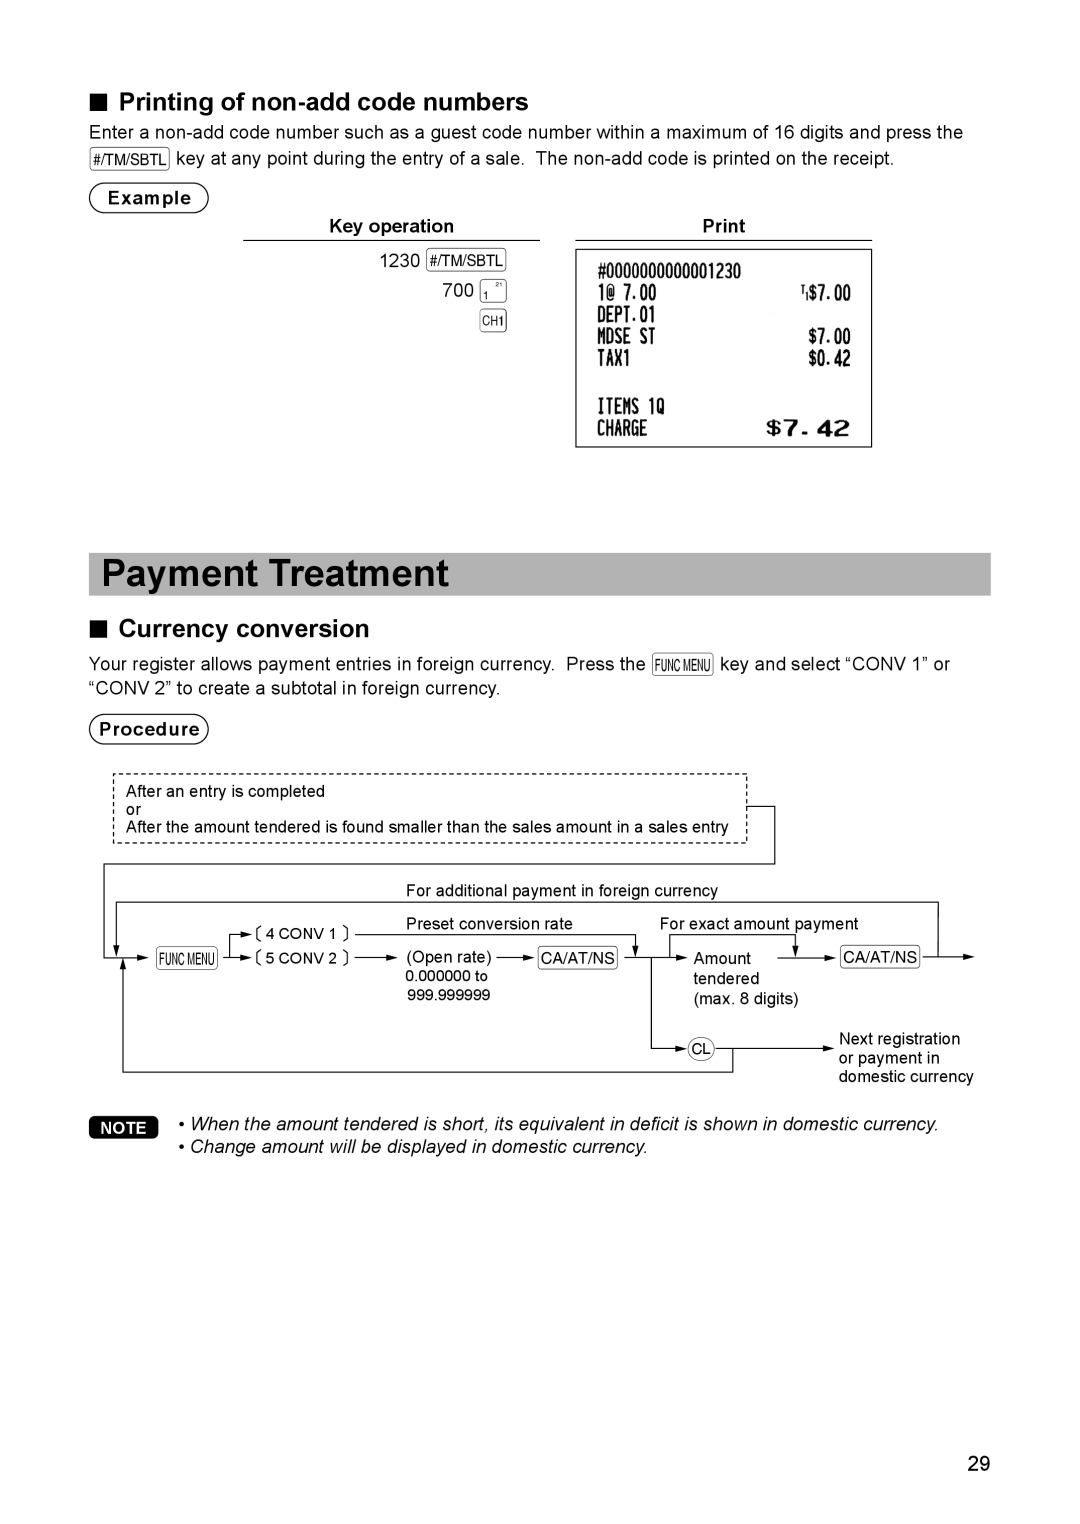 Sharp ER-A347A instruction manual Payment Treatment, 700 1, Printing of non-add code numbers, Currency conversion 